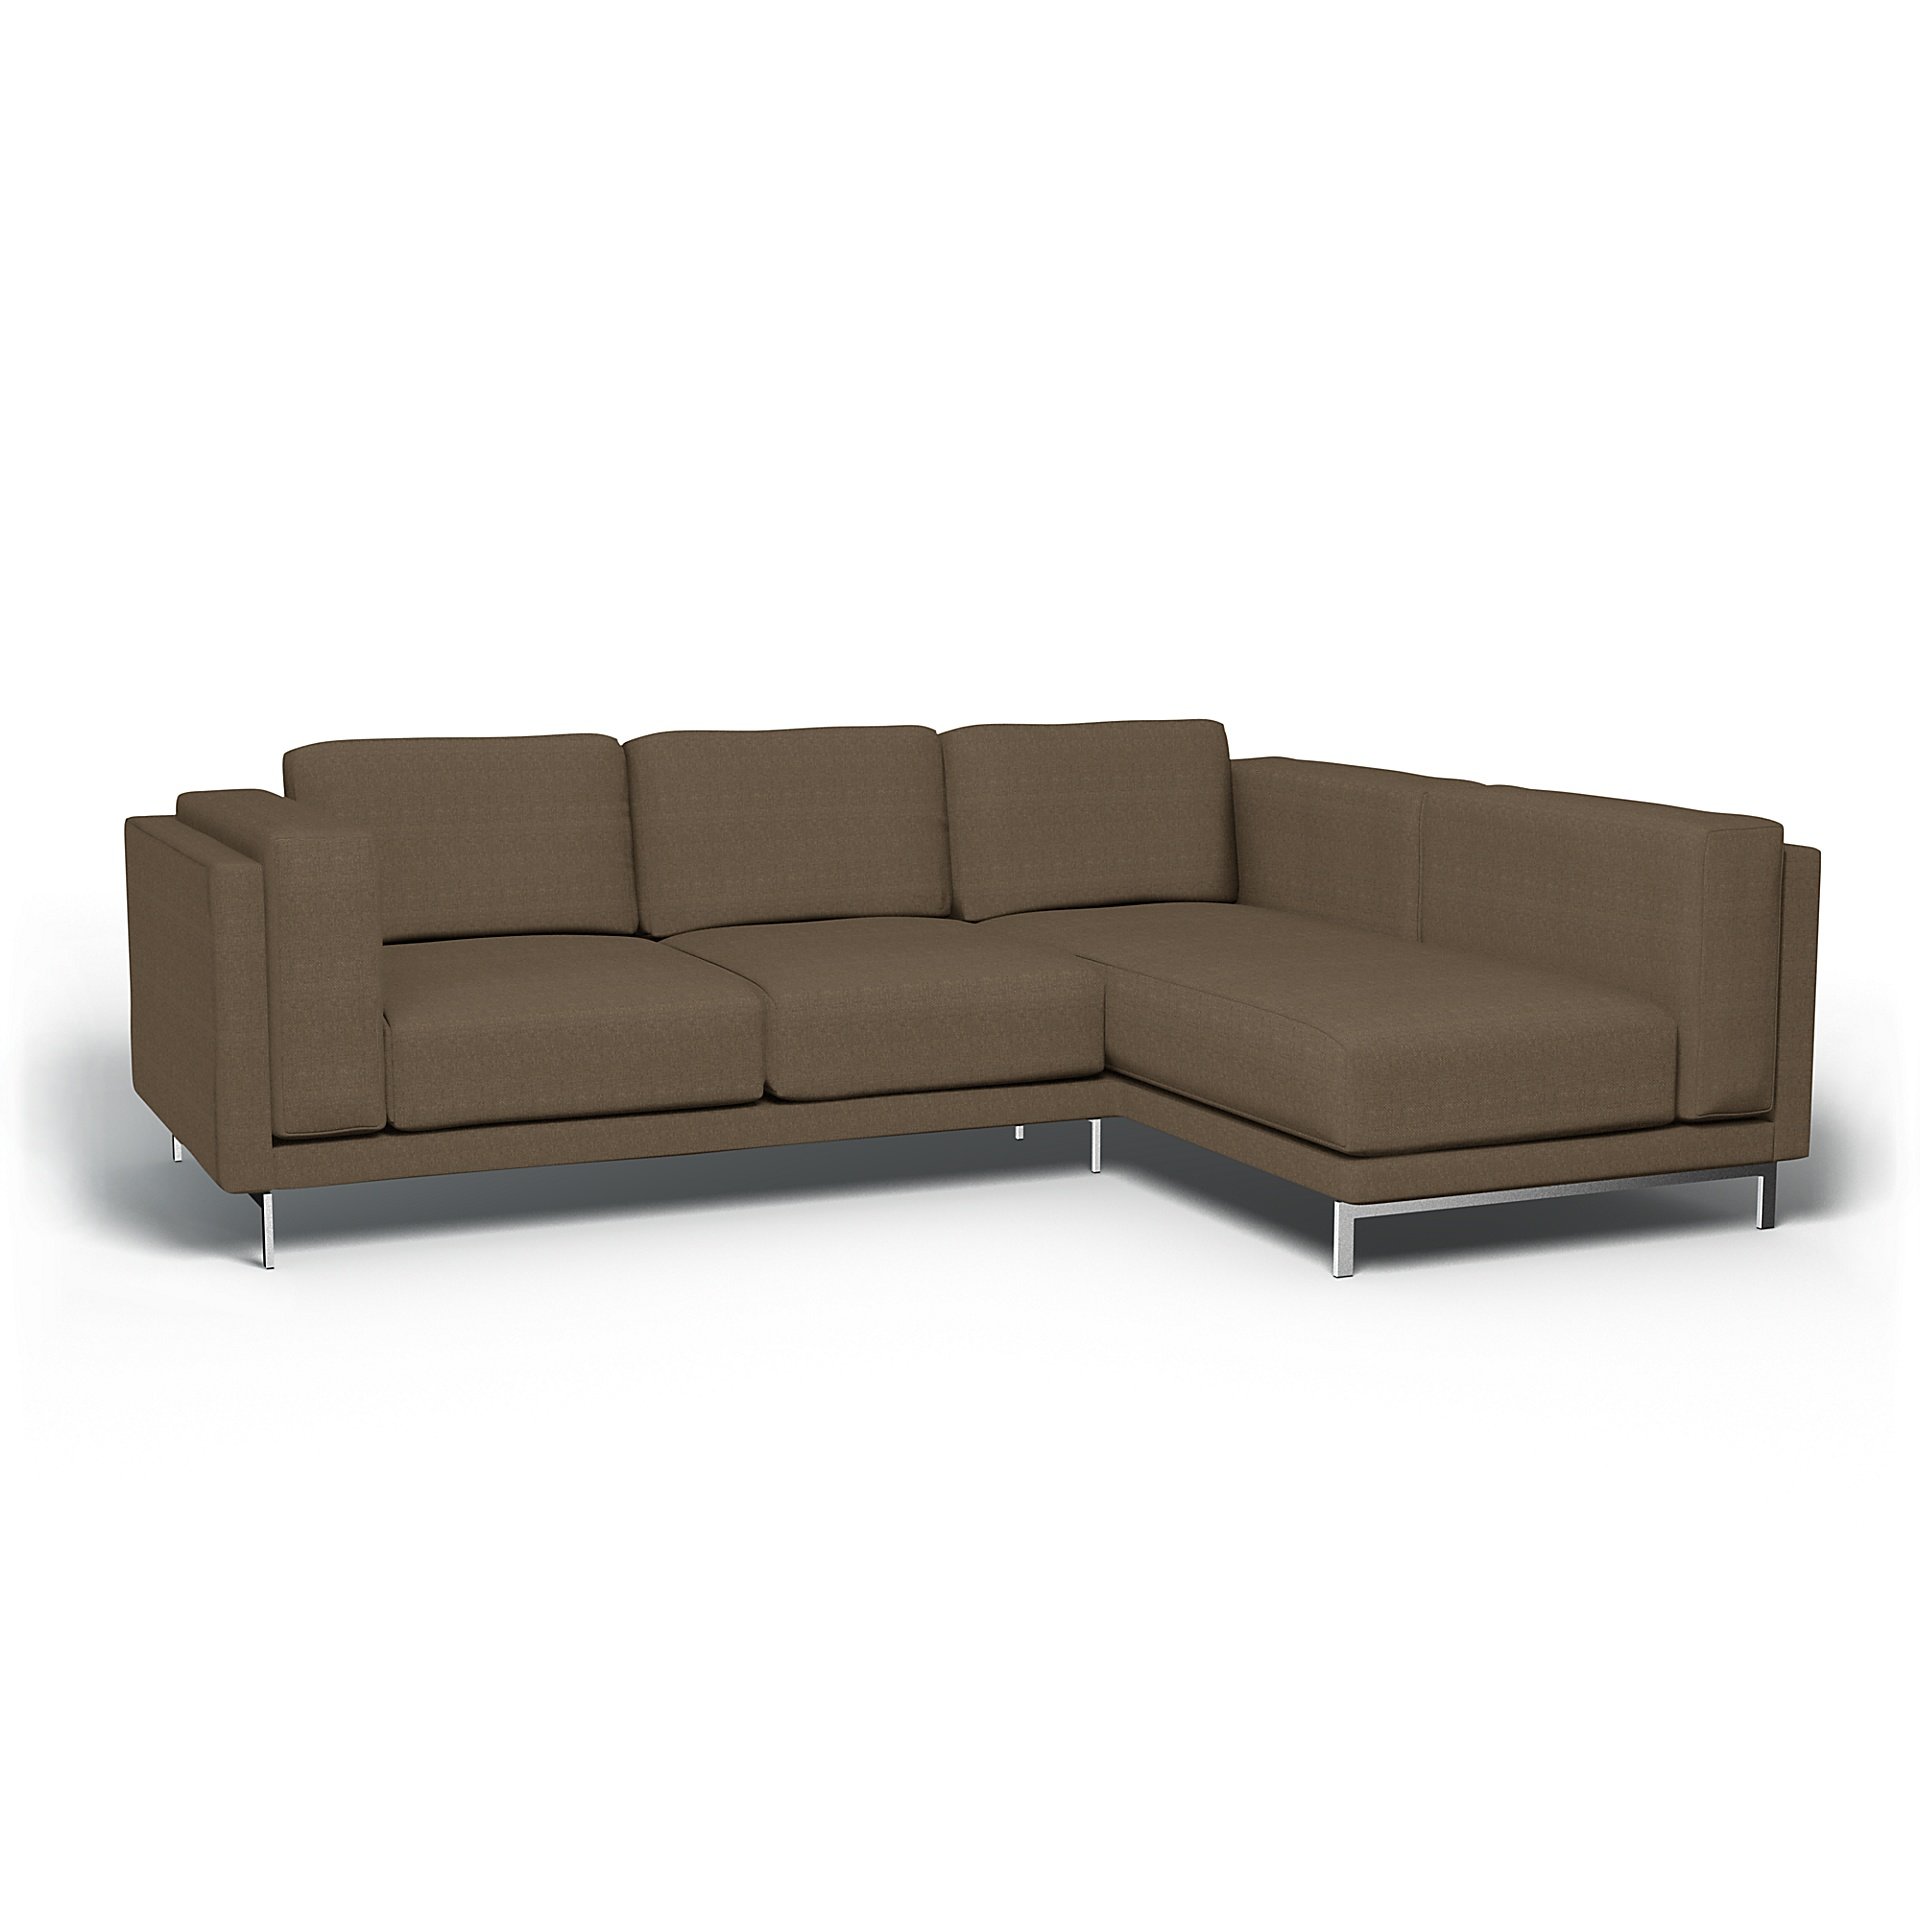 IKEA - Nockeby 3 Seat Sofa with Right Chaise Cover, Dark Taupe, Boucle & Texture - Bemz